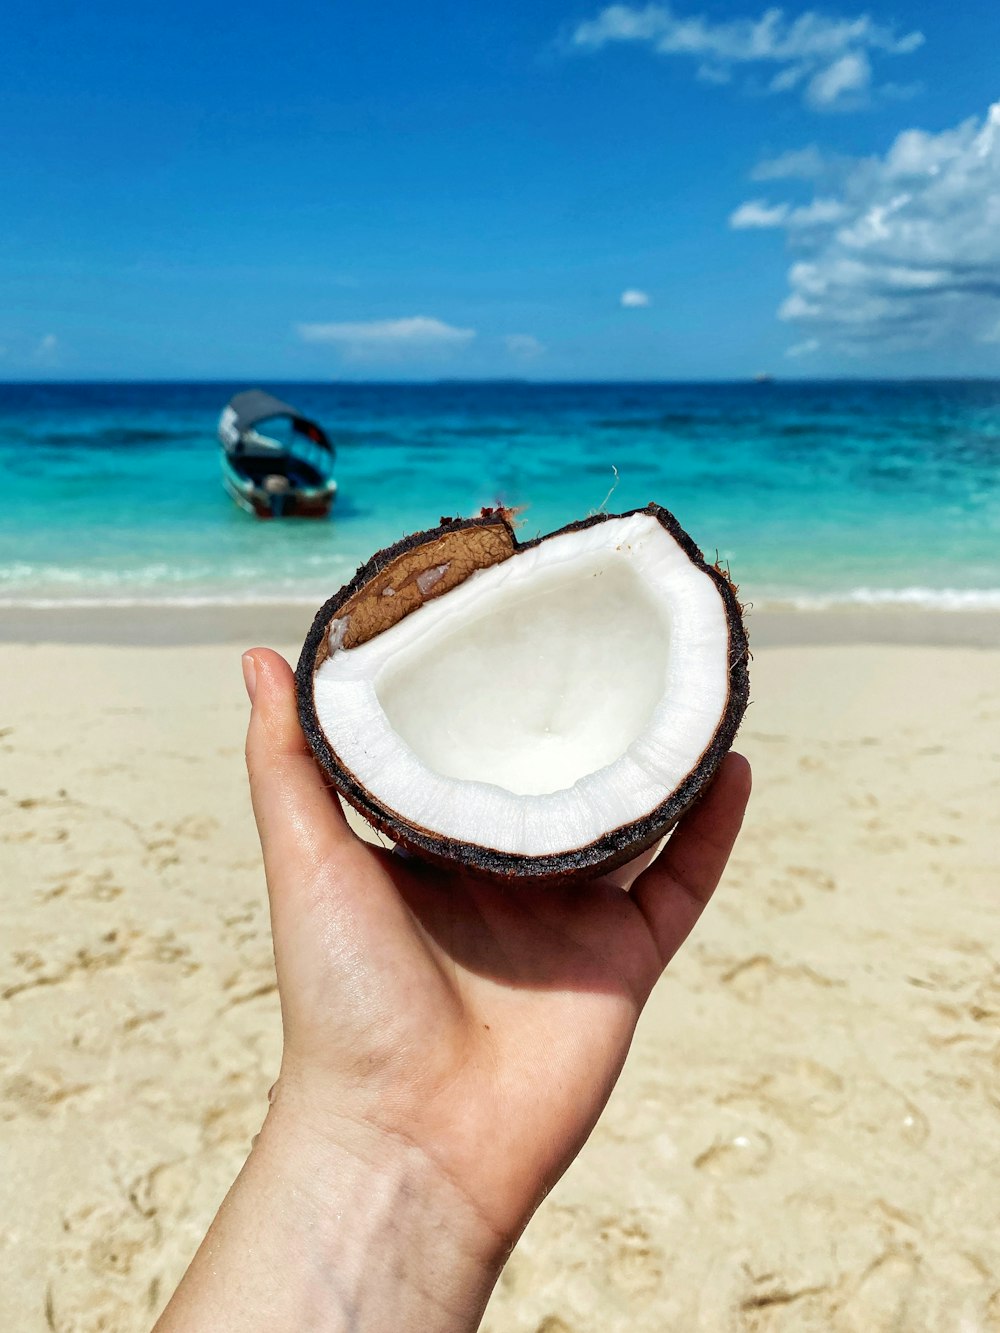 person holding coconut shell near sea during daytime